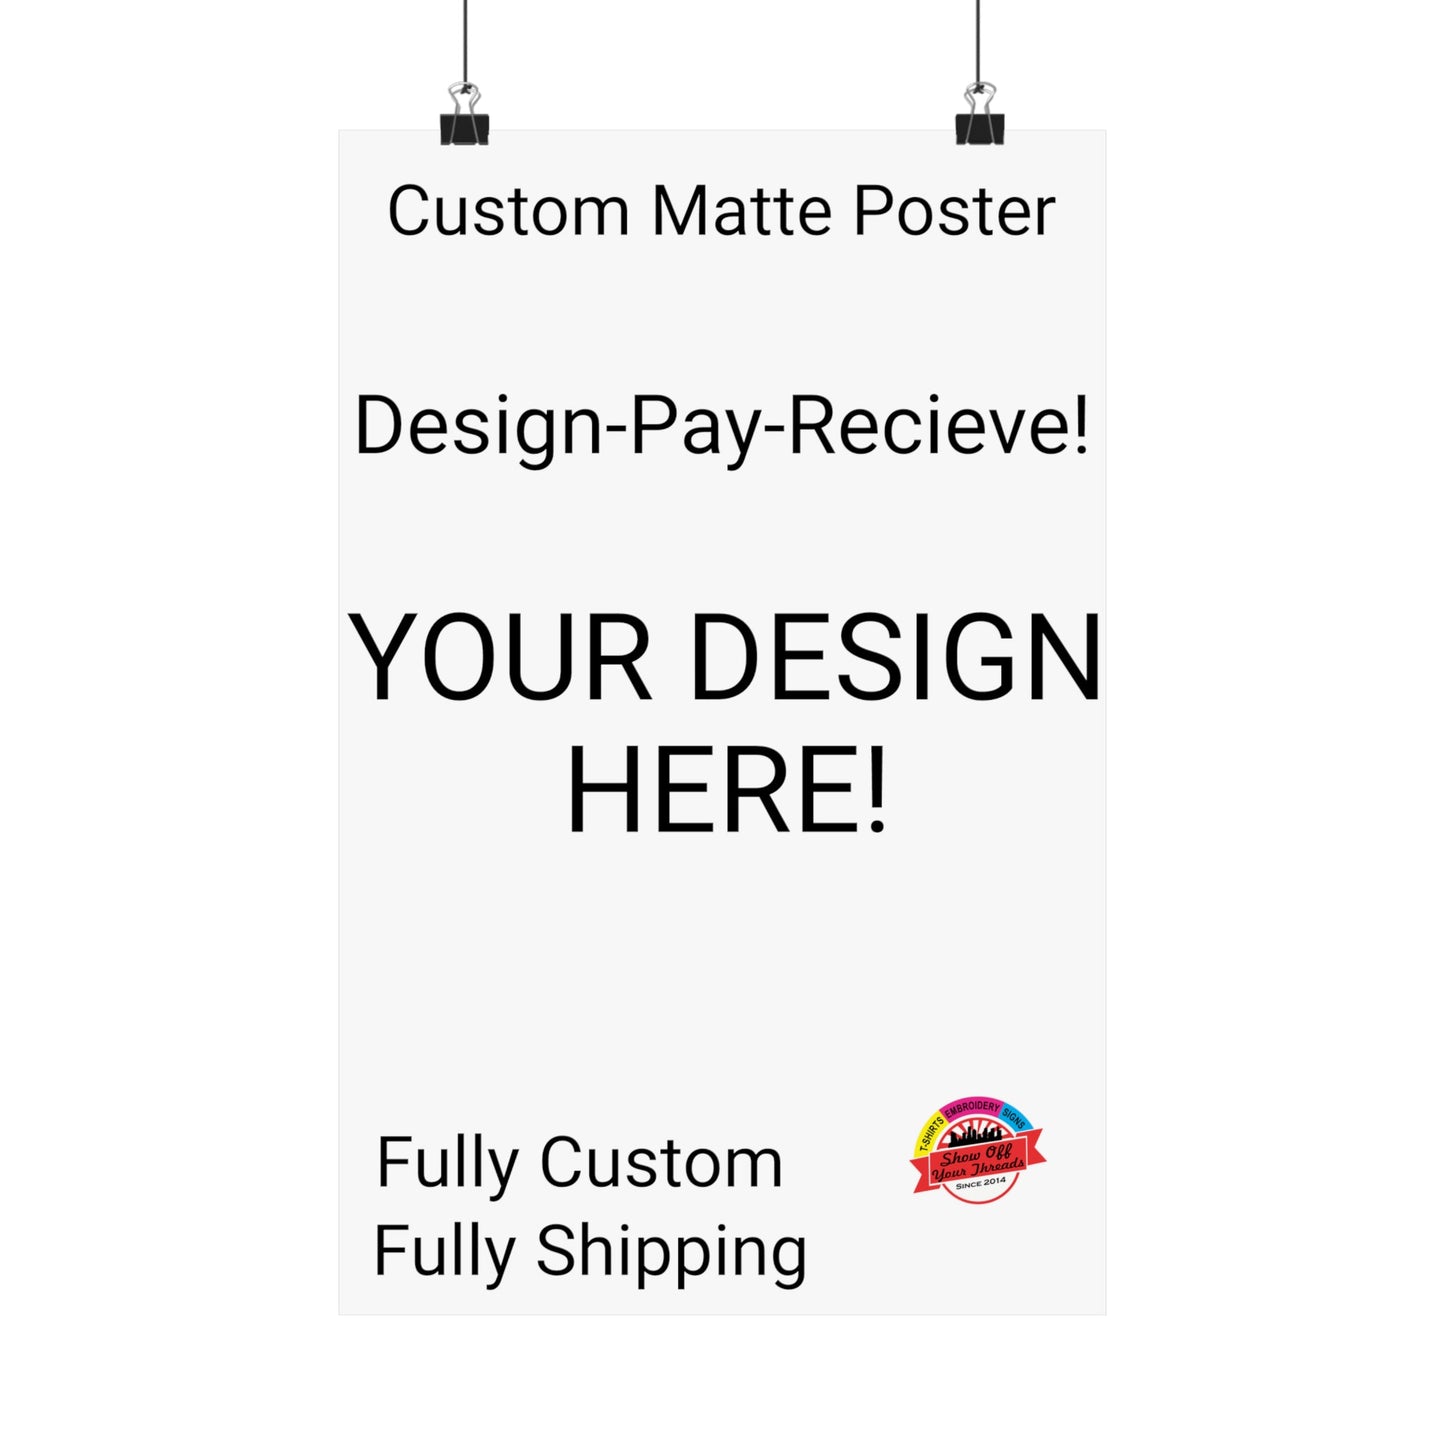 Custom Retail Advertising Posters - Engage and Attract Customers